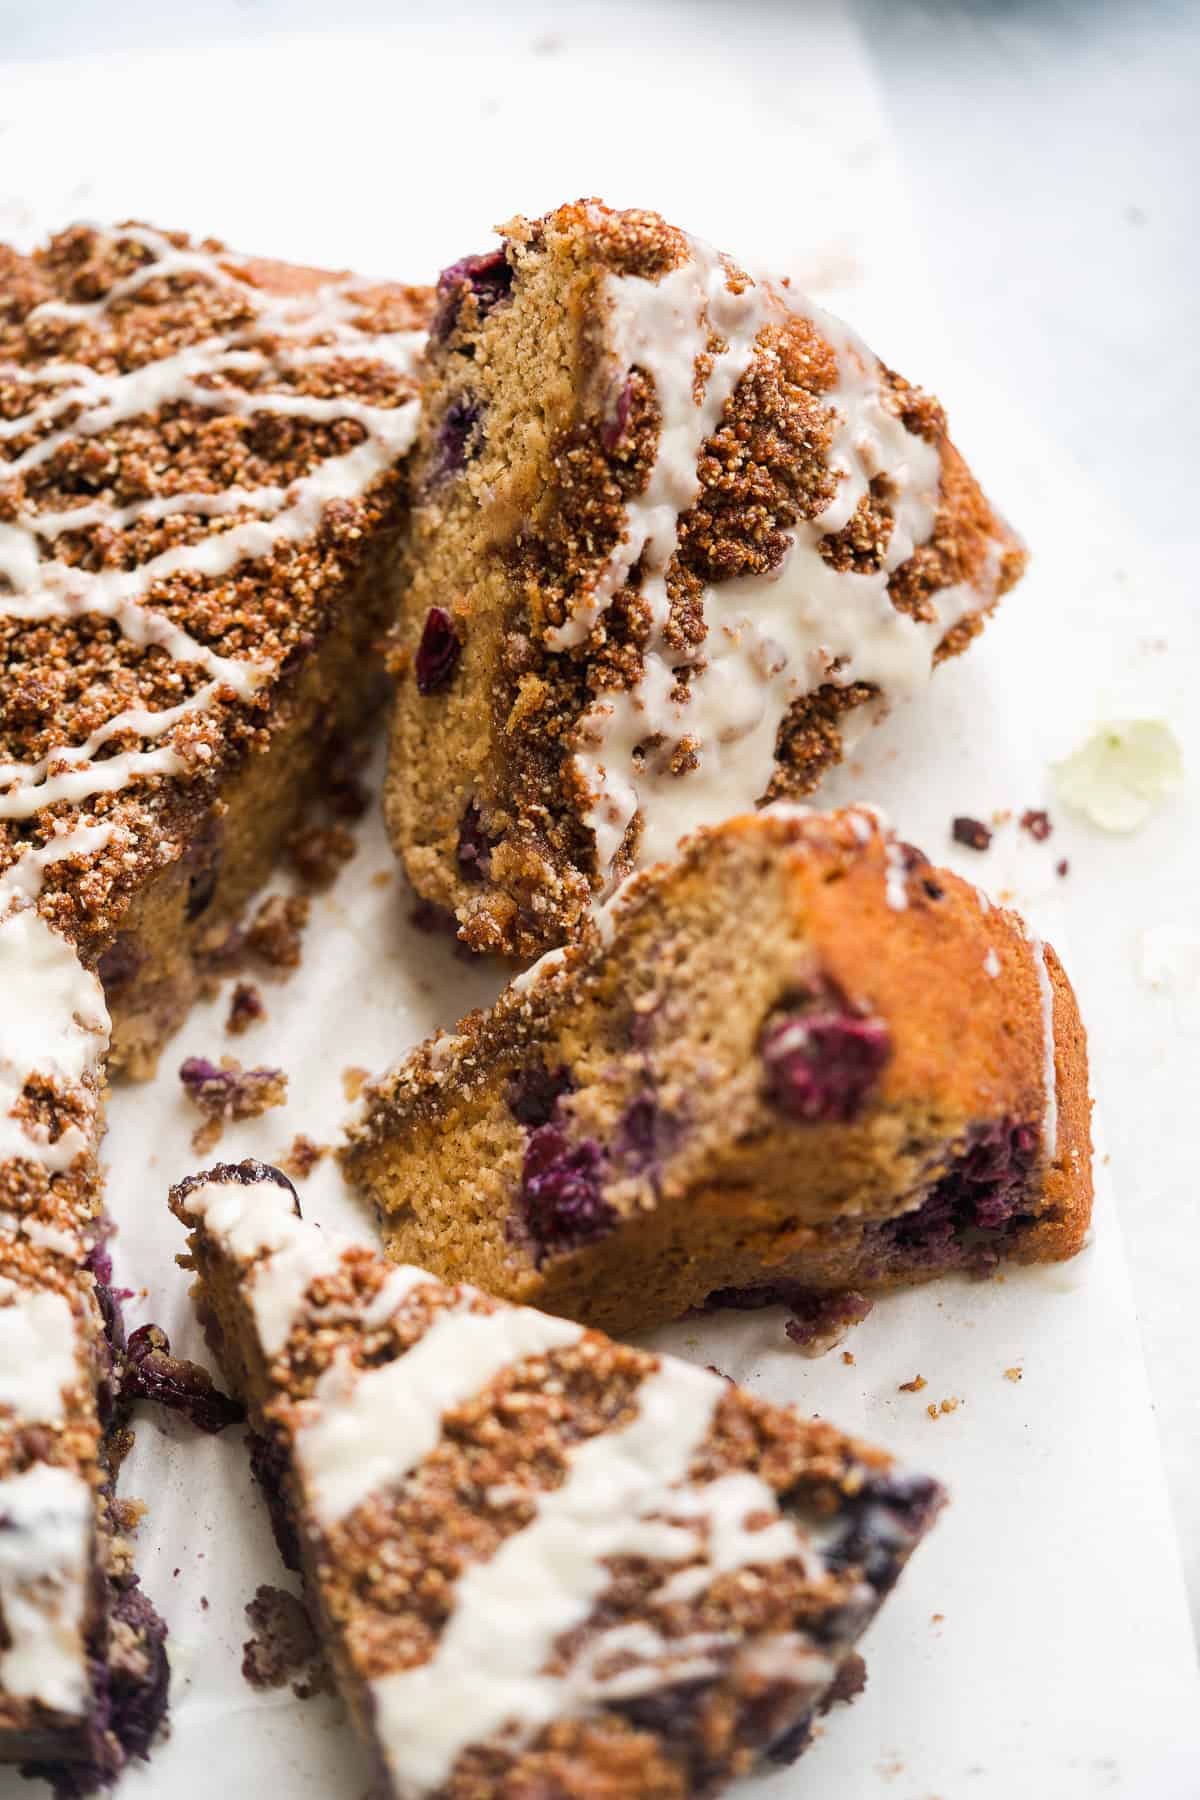 Coffee cake cut into triangles with blueberries and glaze scattered on surface.